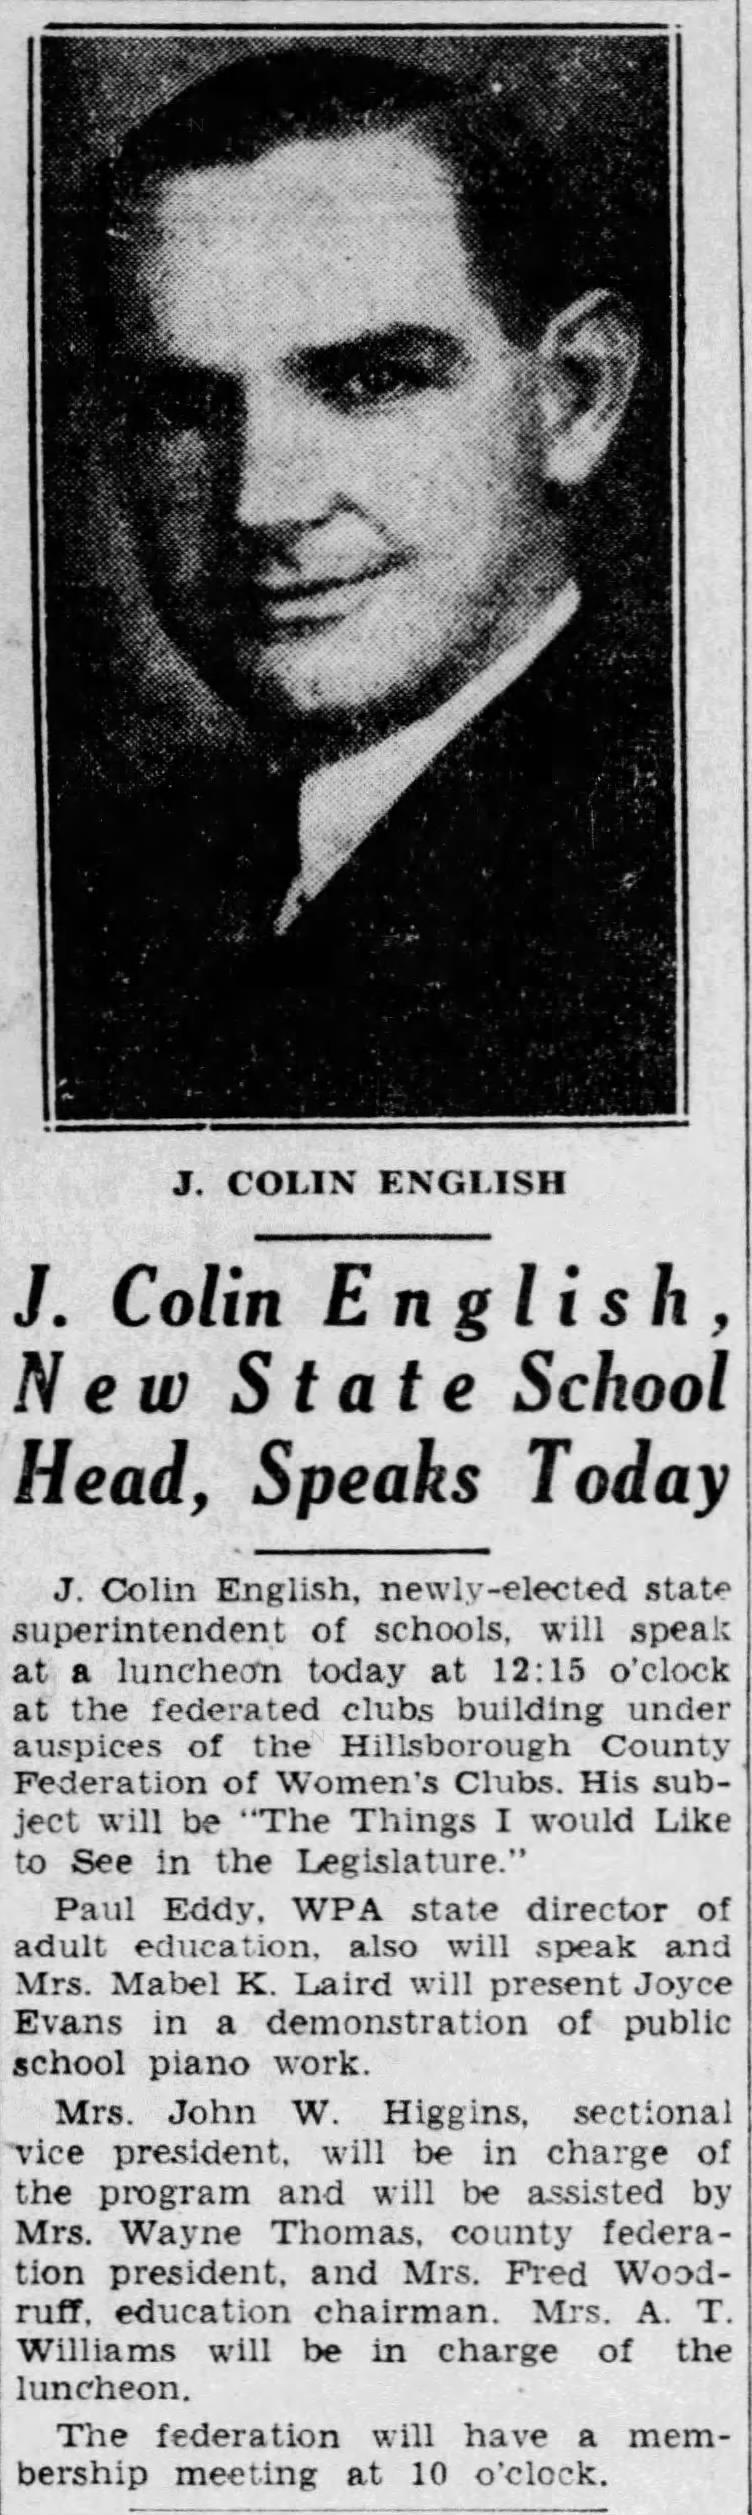 J. Colin English, New state school head, speaks today